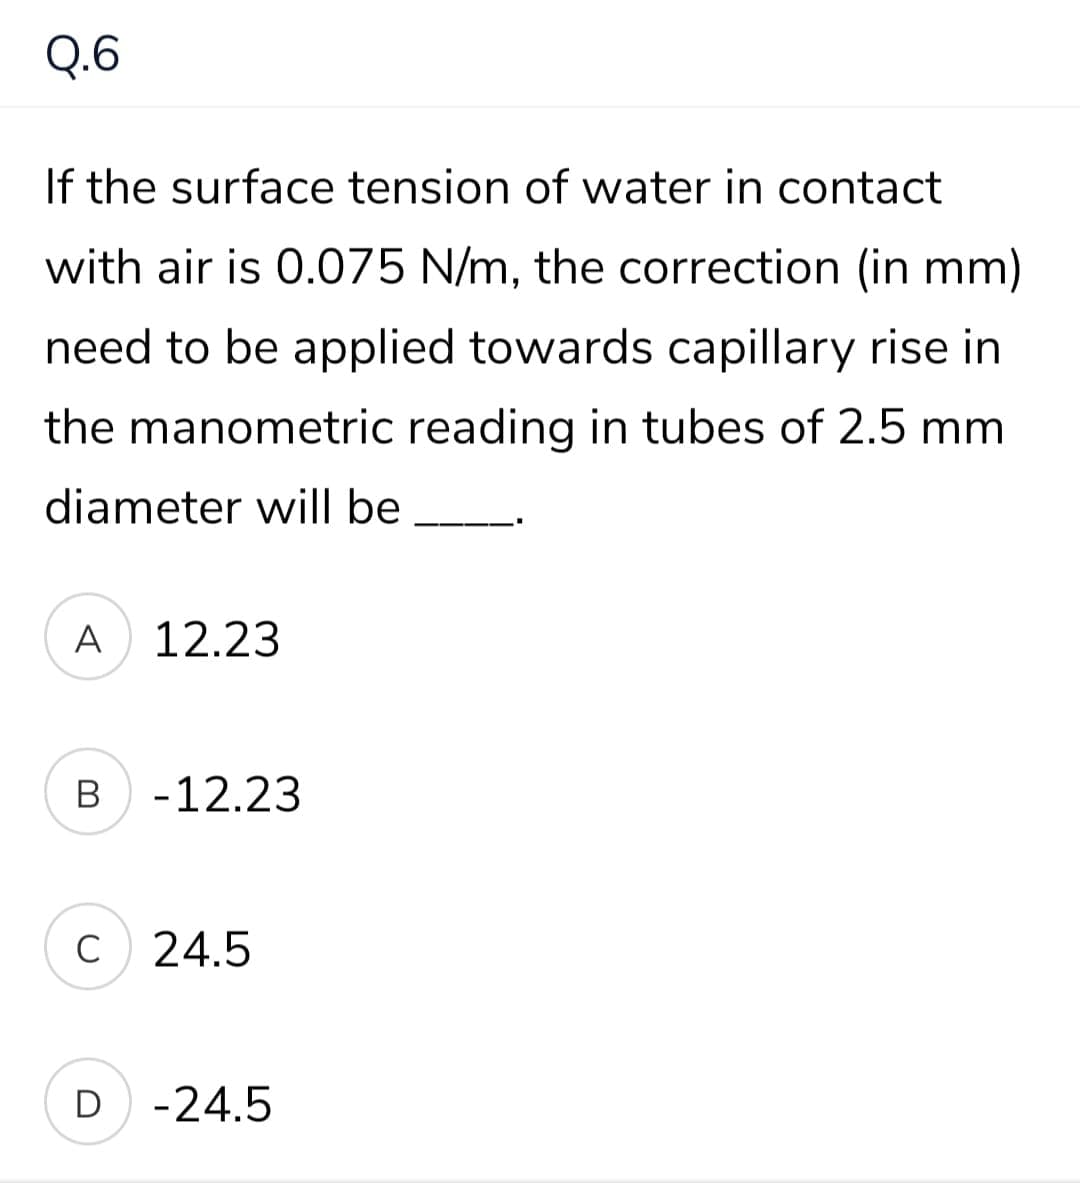 Q.6
If the surface tension of water in contact
with air is 0.075 N/m, the correction (in mm)
need to be applied towards capillary rise in
the manometric reading in tubes of 2.5 mm
diameter will be
A
12.23
В
-12.23
C
24.5
D -24.5
